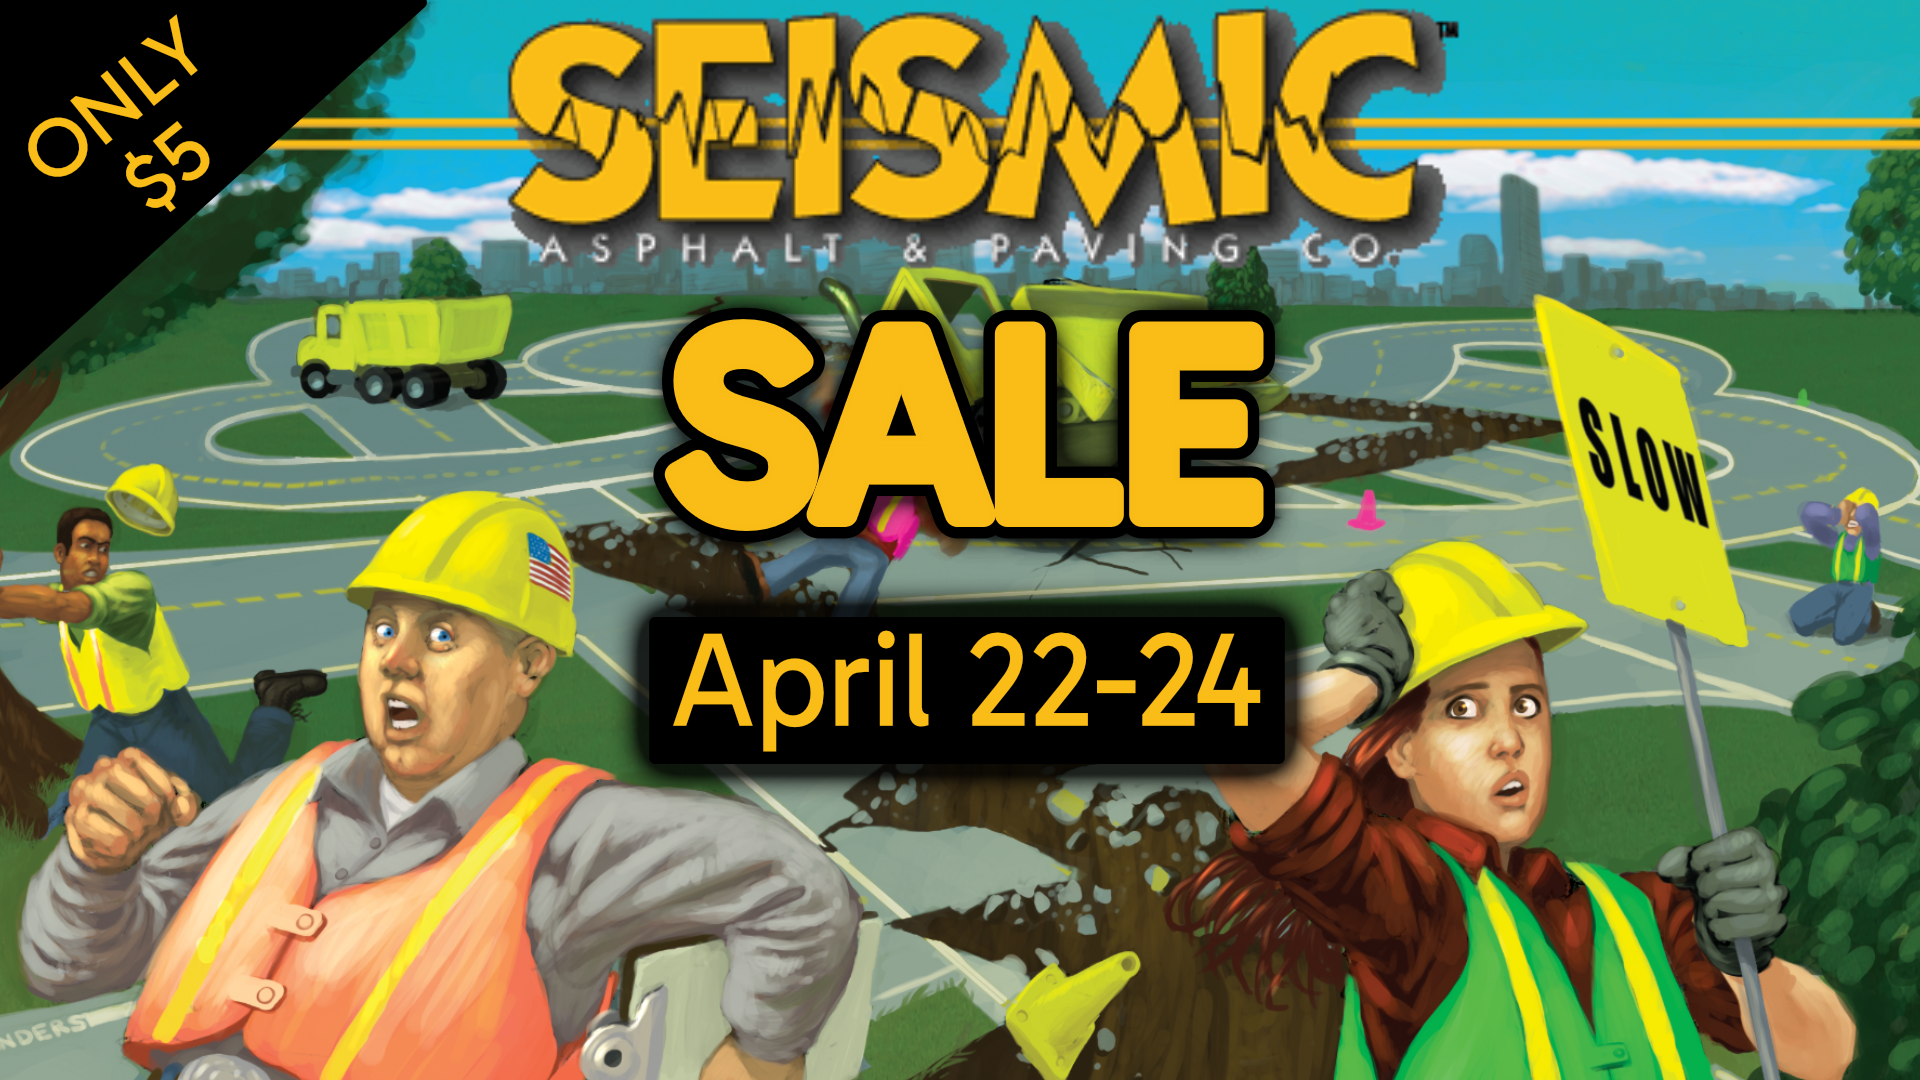 $5 Seismic Sale for Earth Day!